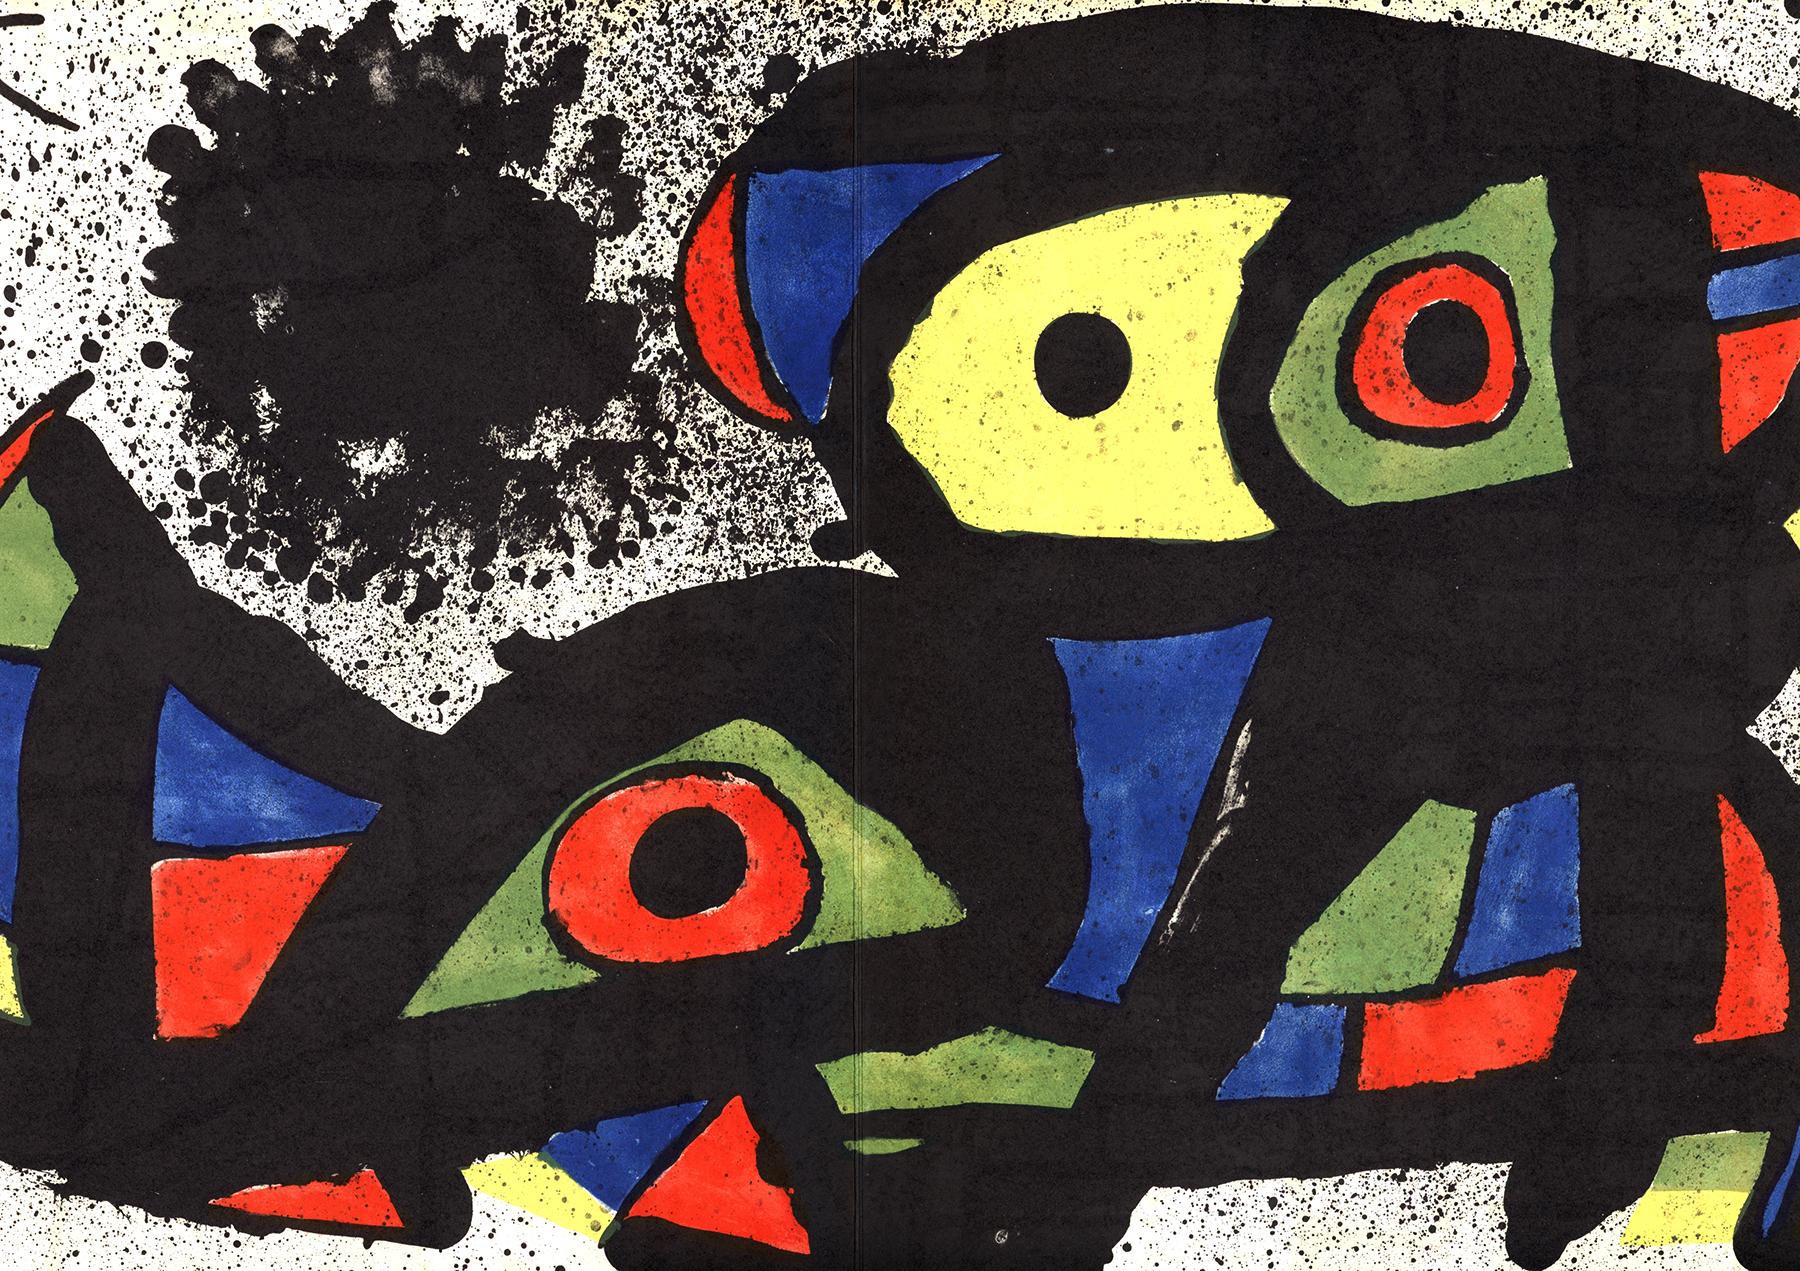 What is an interesting fact about Joan Miró?